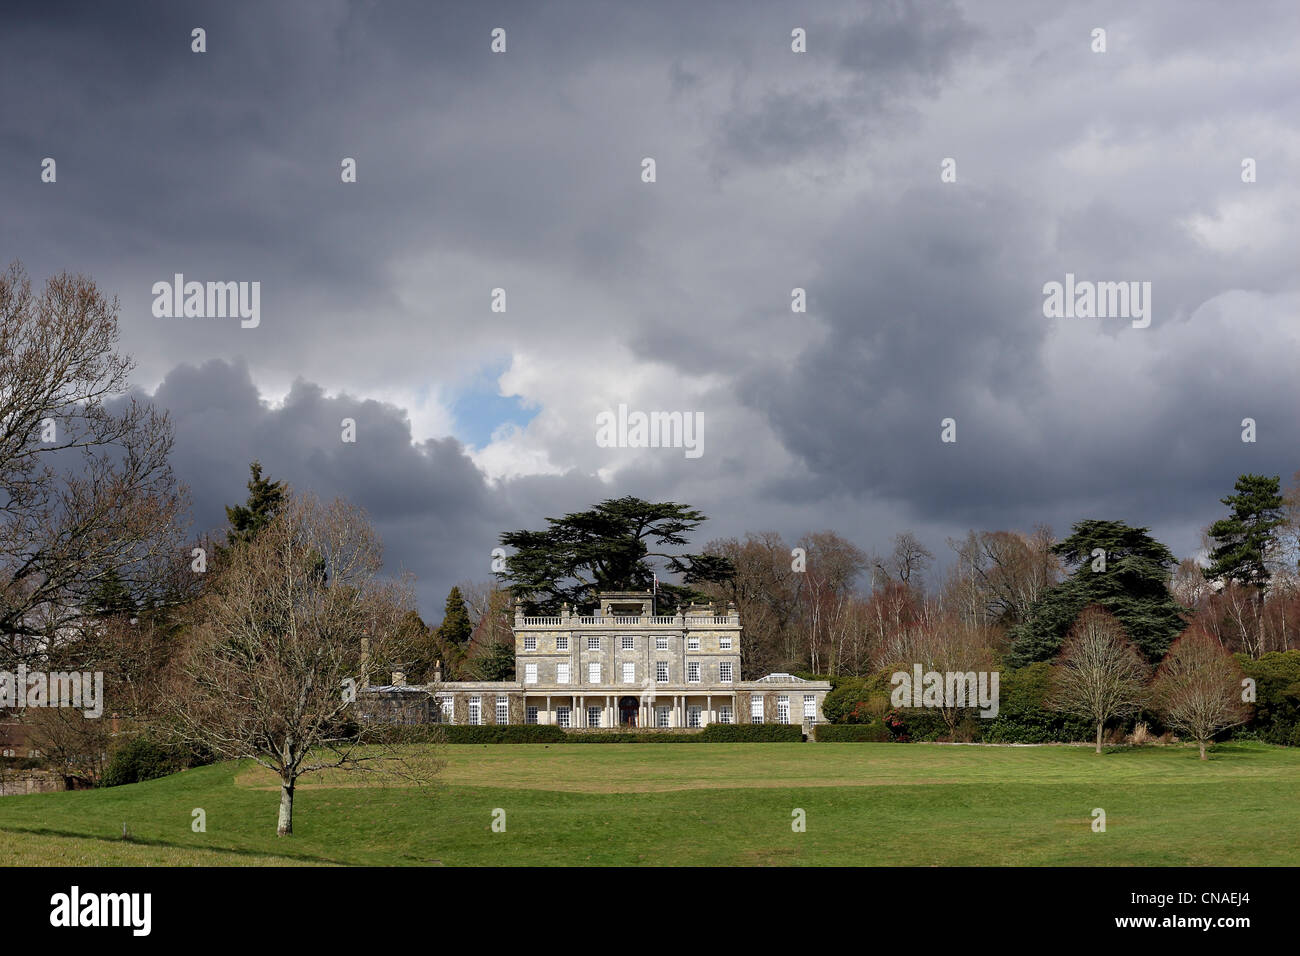 Saint Hill Manor House, der Scientology Kirche in East Grinstead, England Stockfoto